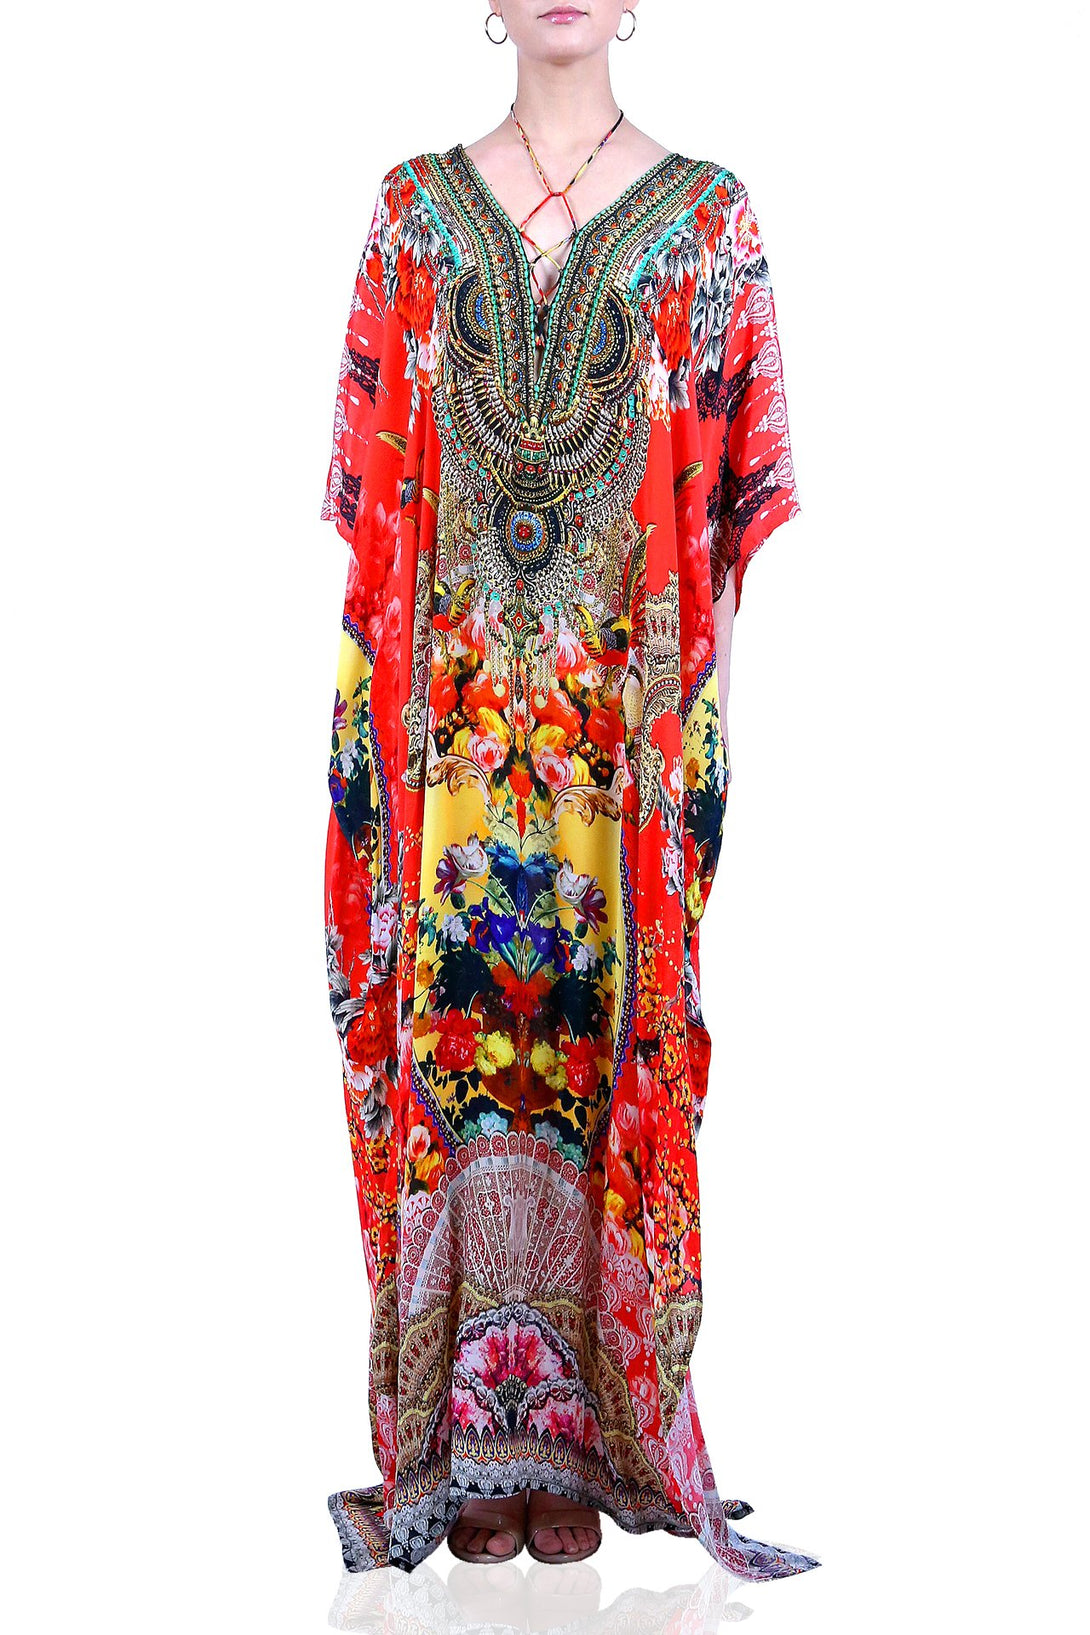 clothes for beach vacation, vacation outfits women, Shahida Parides, kaftan outfit,